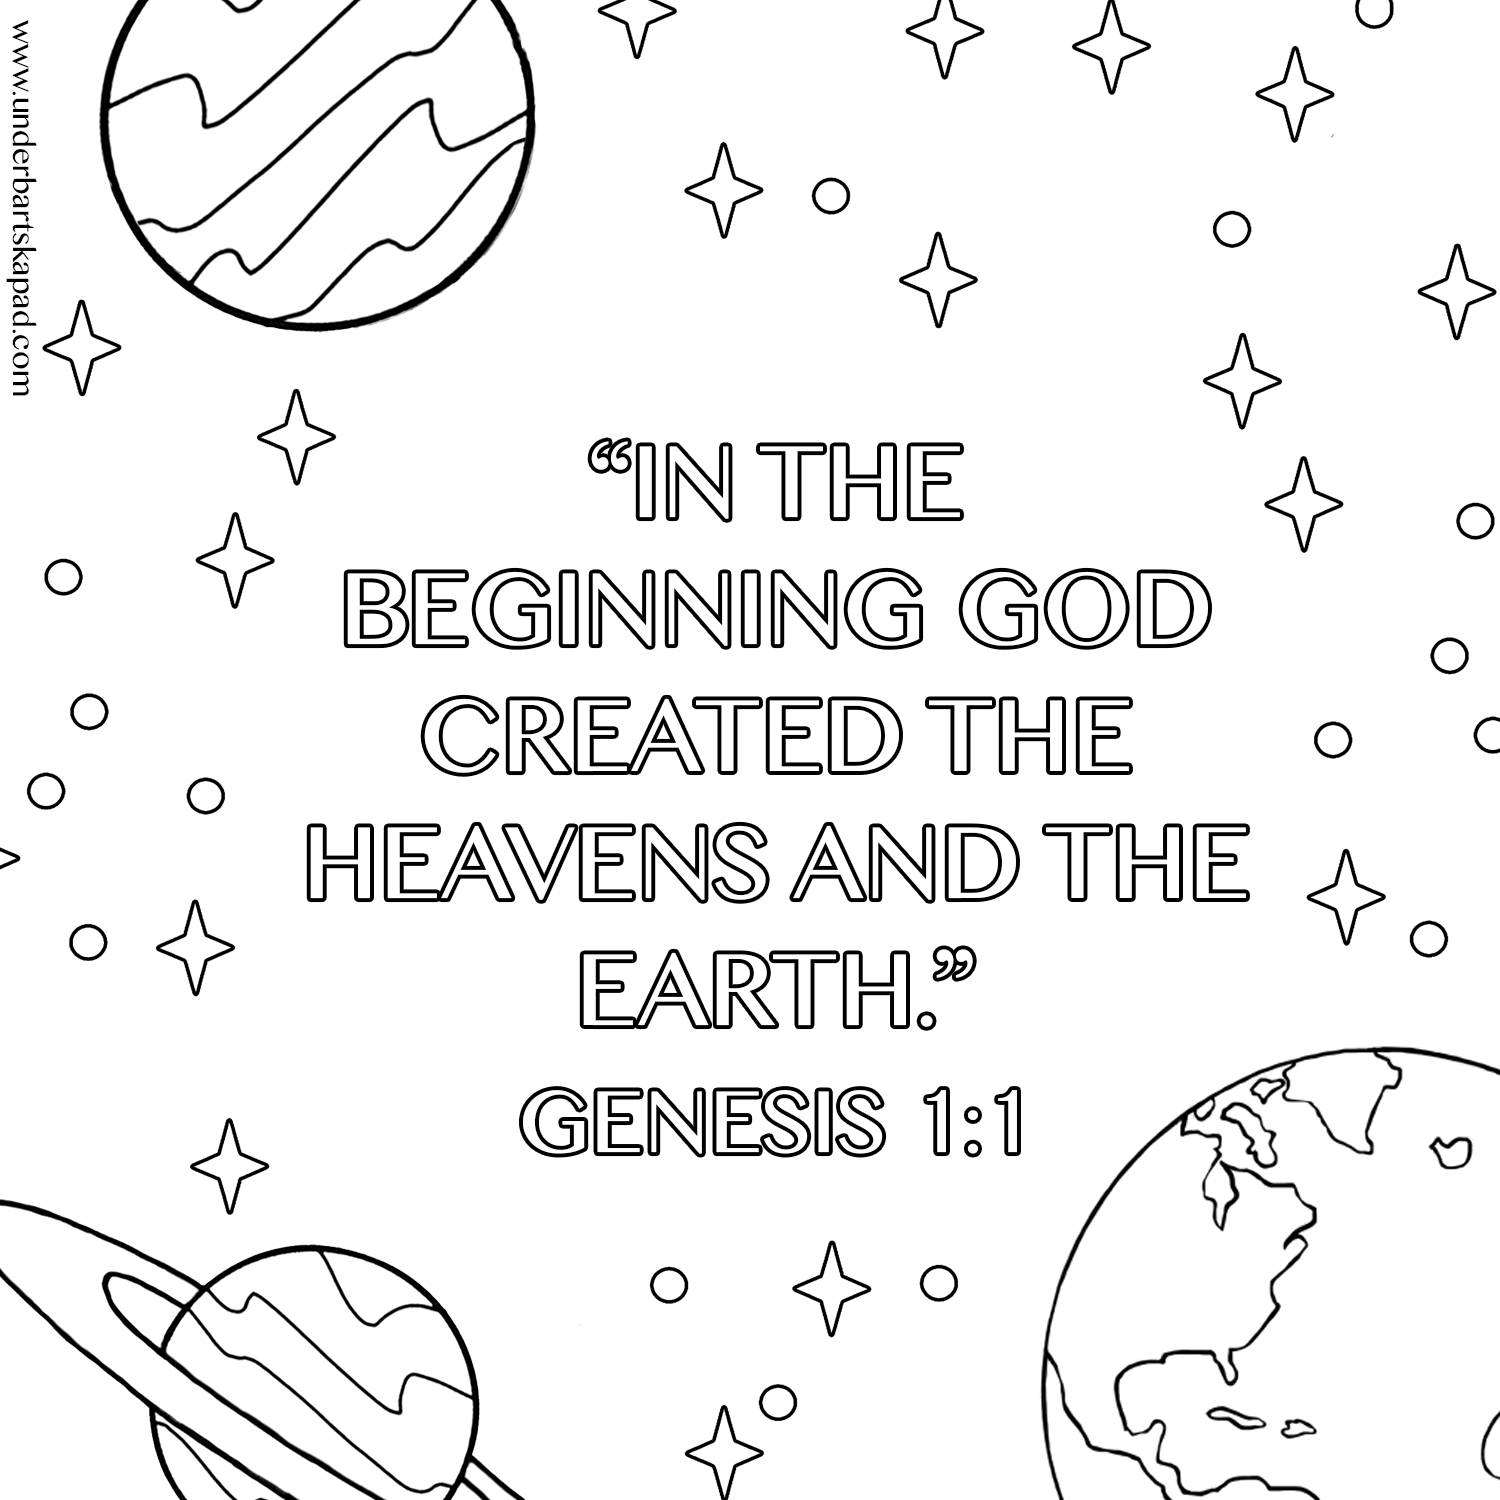 5 Free Printable Bible Coloring Pages with Scripture - Underbart skapad